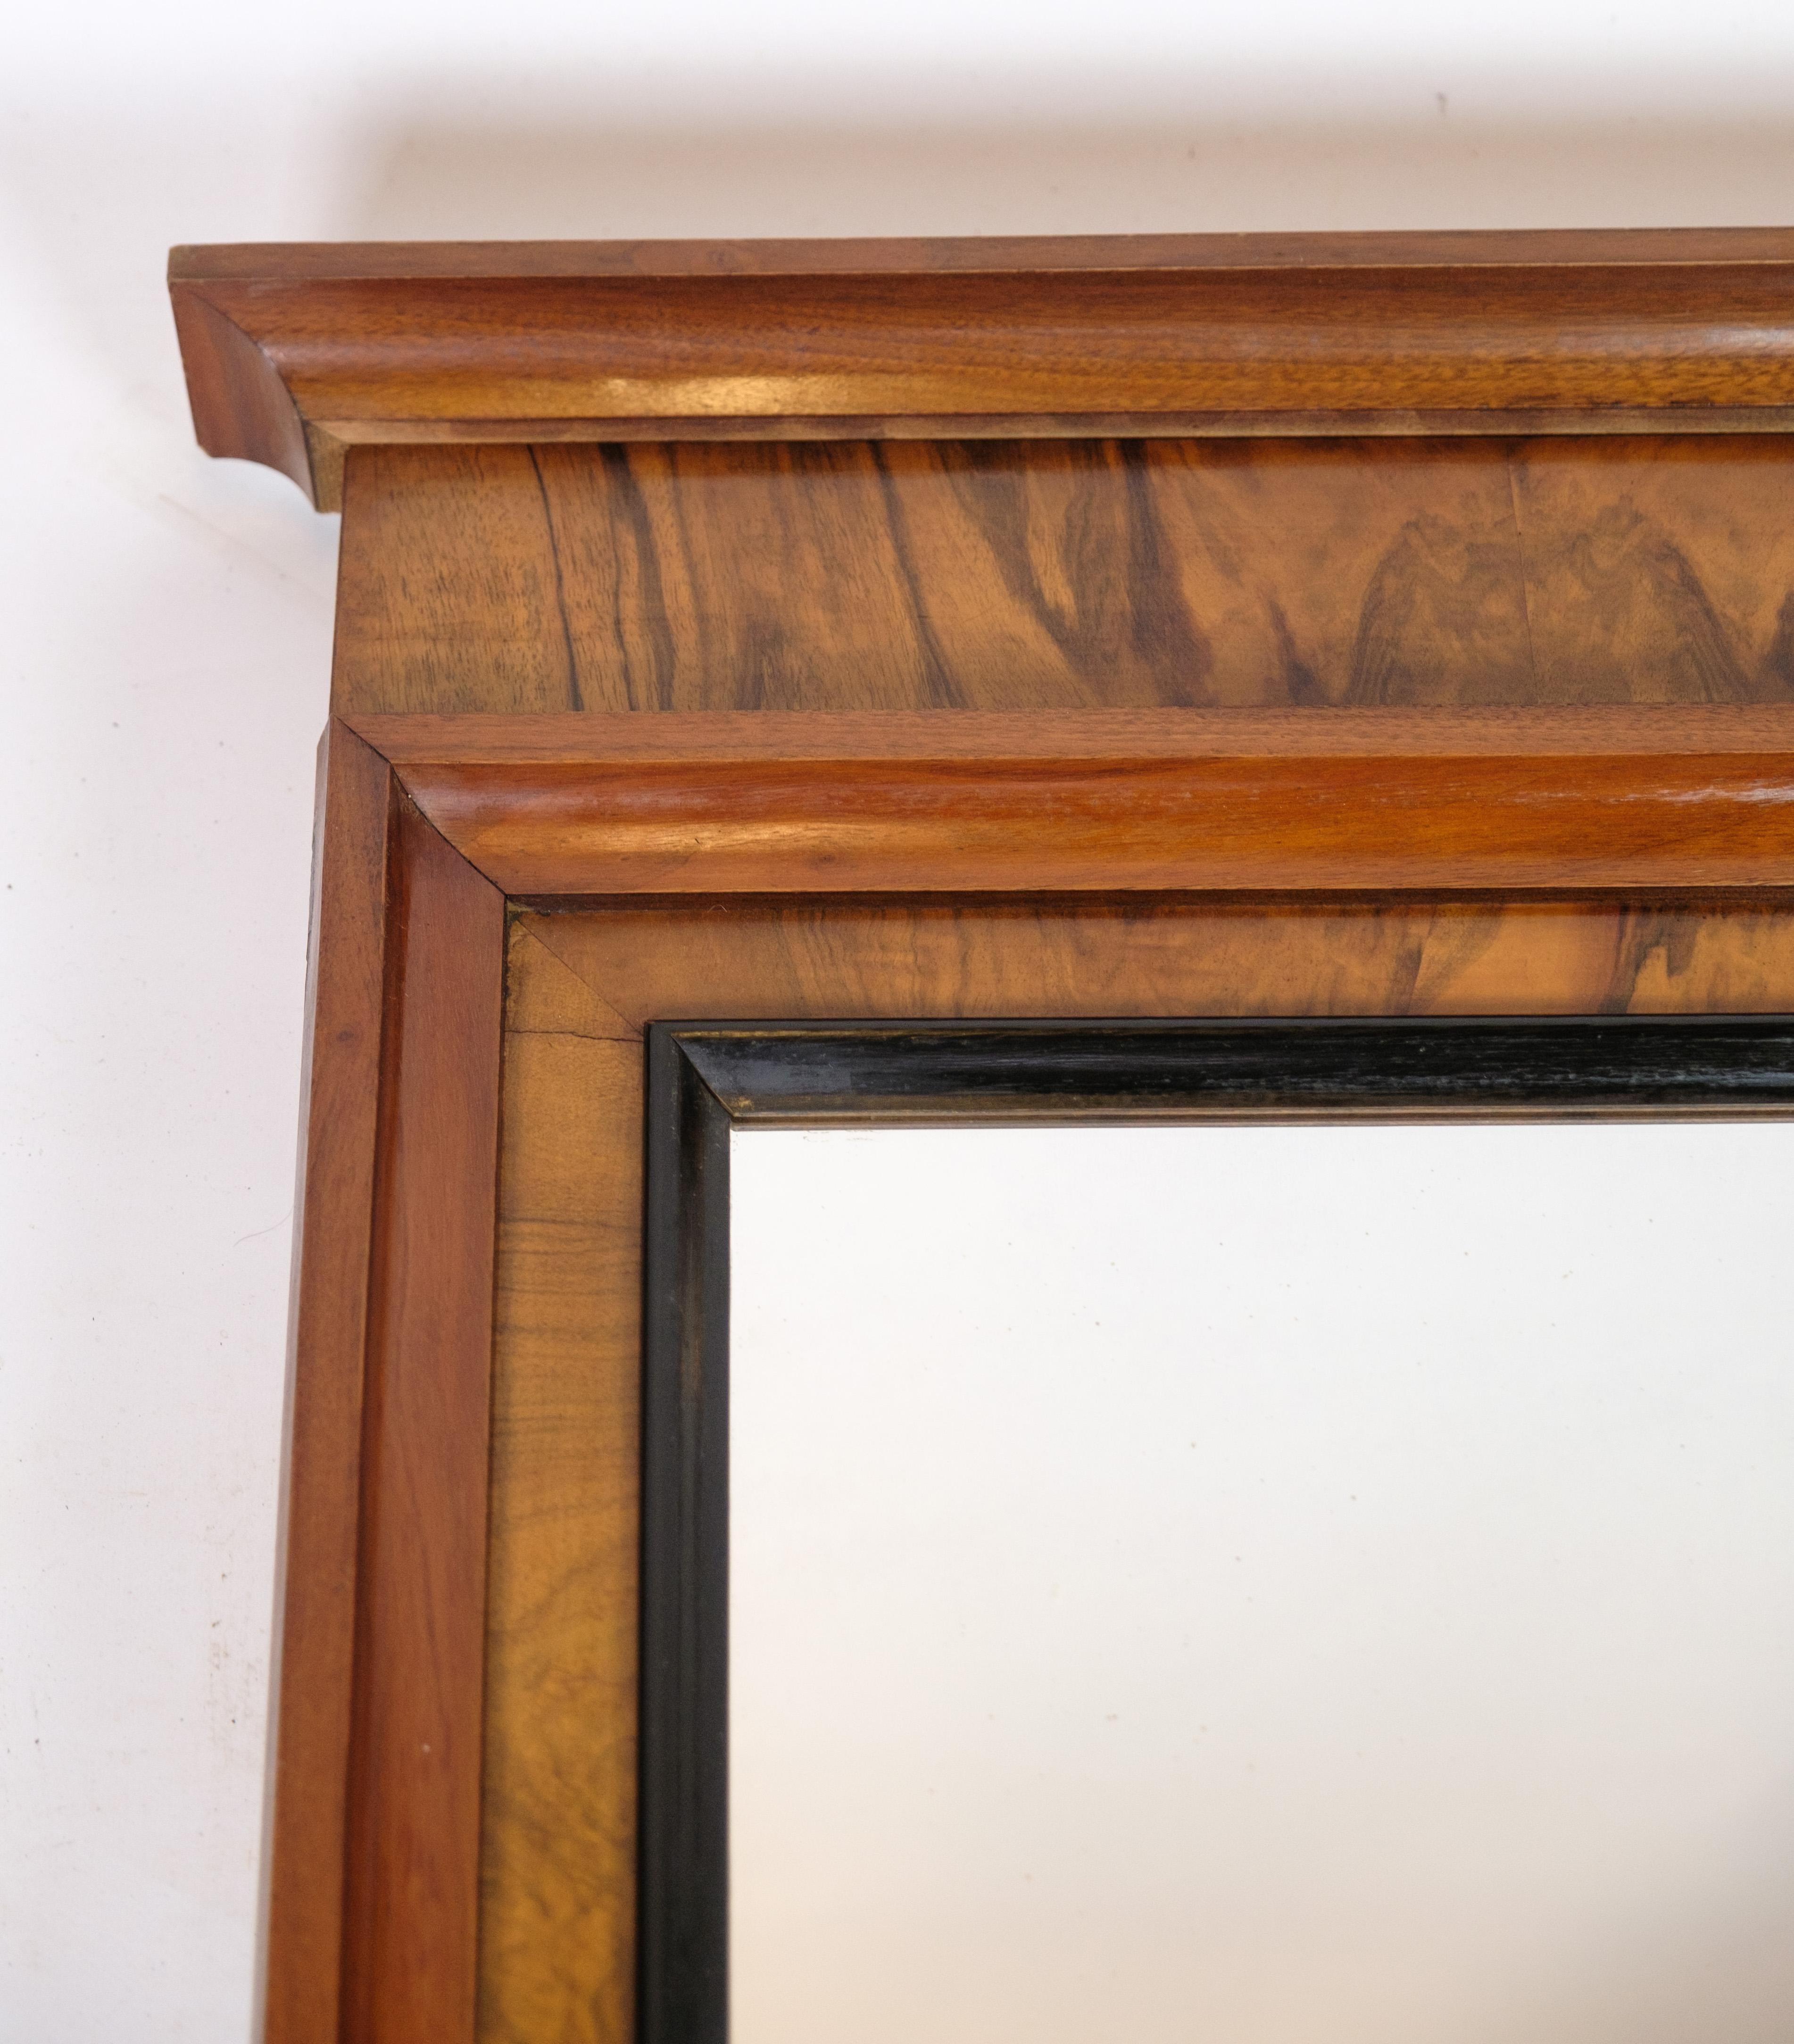 Antique mirror in mahogany wood from the late Empire period from around the 1840s. Light in colour, due to sunlight over the years.
Dimensions in cm: H:125 W:59